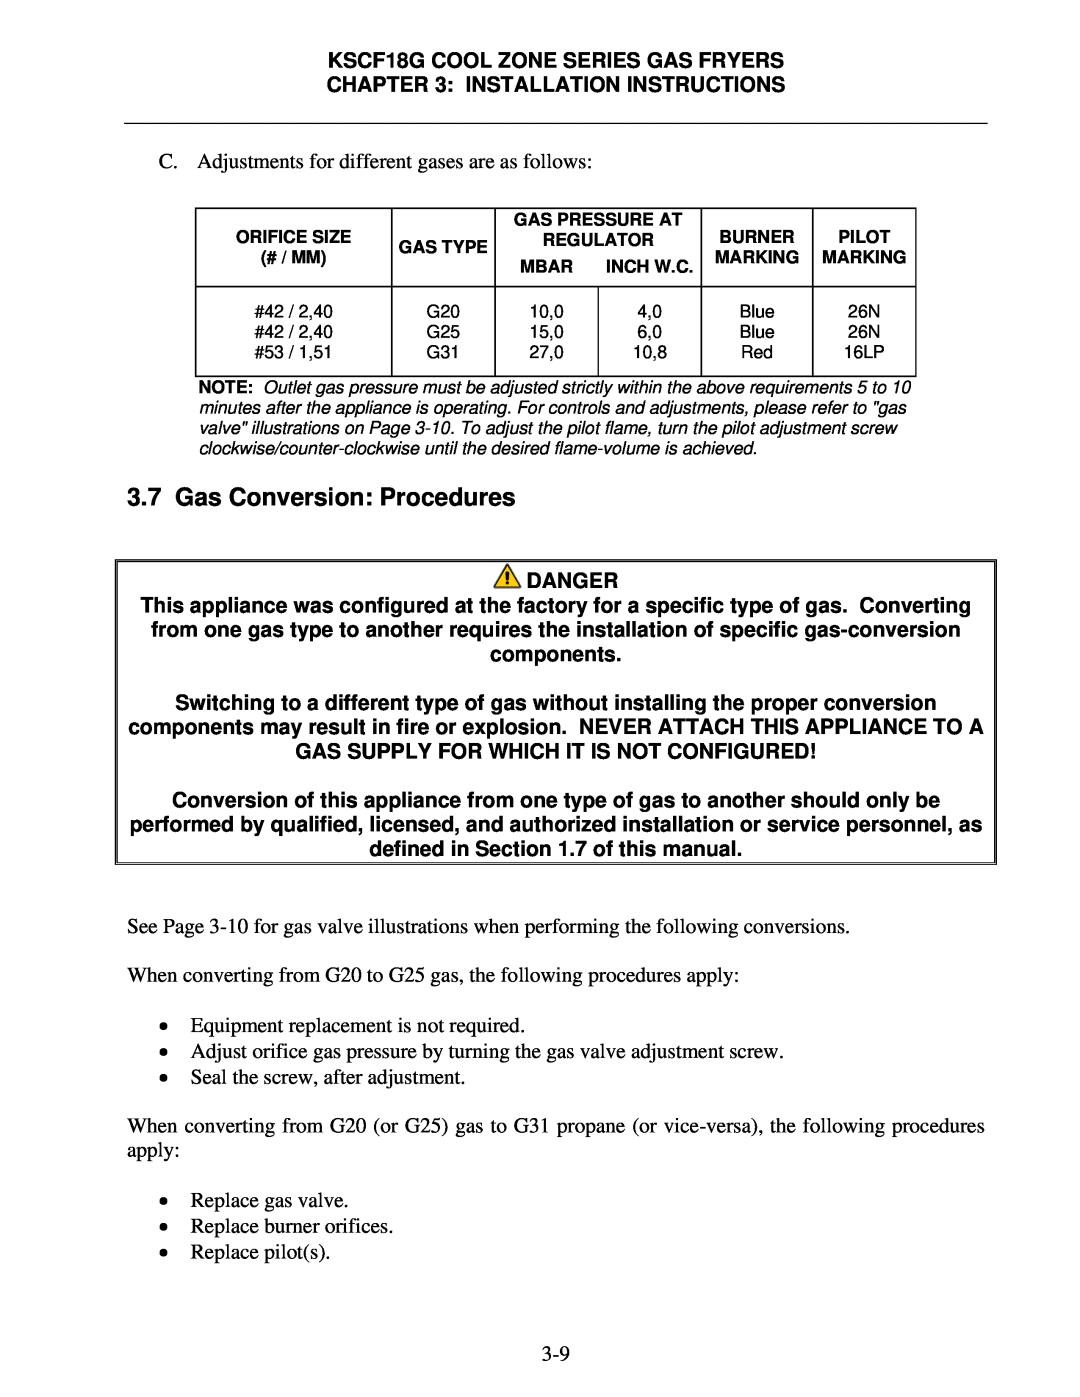 Frymaster KSCF18G Gas Conversion: Procedures, Gas Supply For Which It Is Not Configured, defined in .7 of this manual 